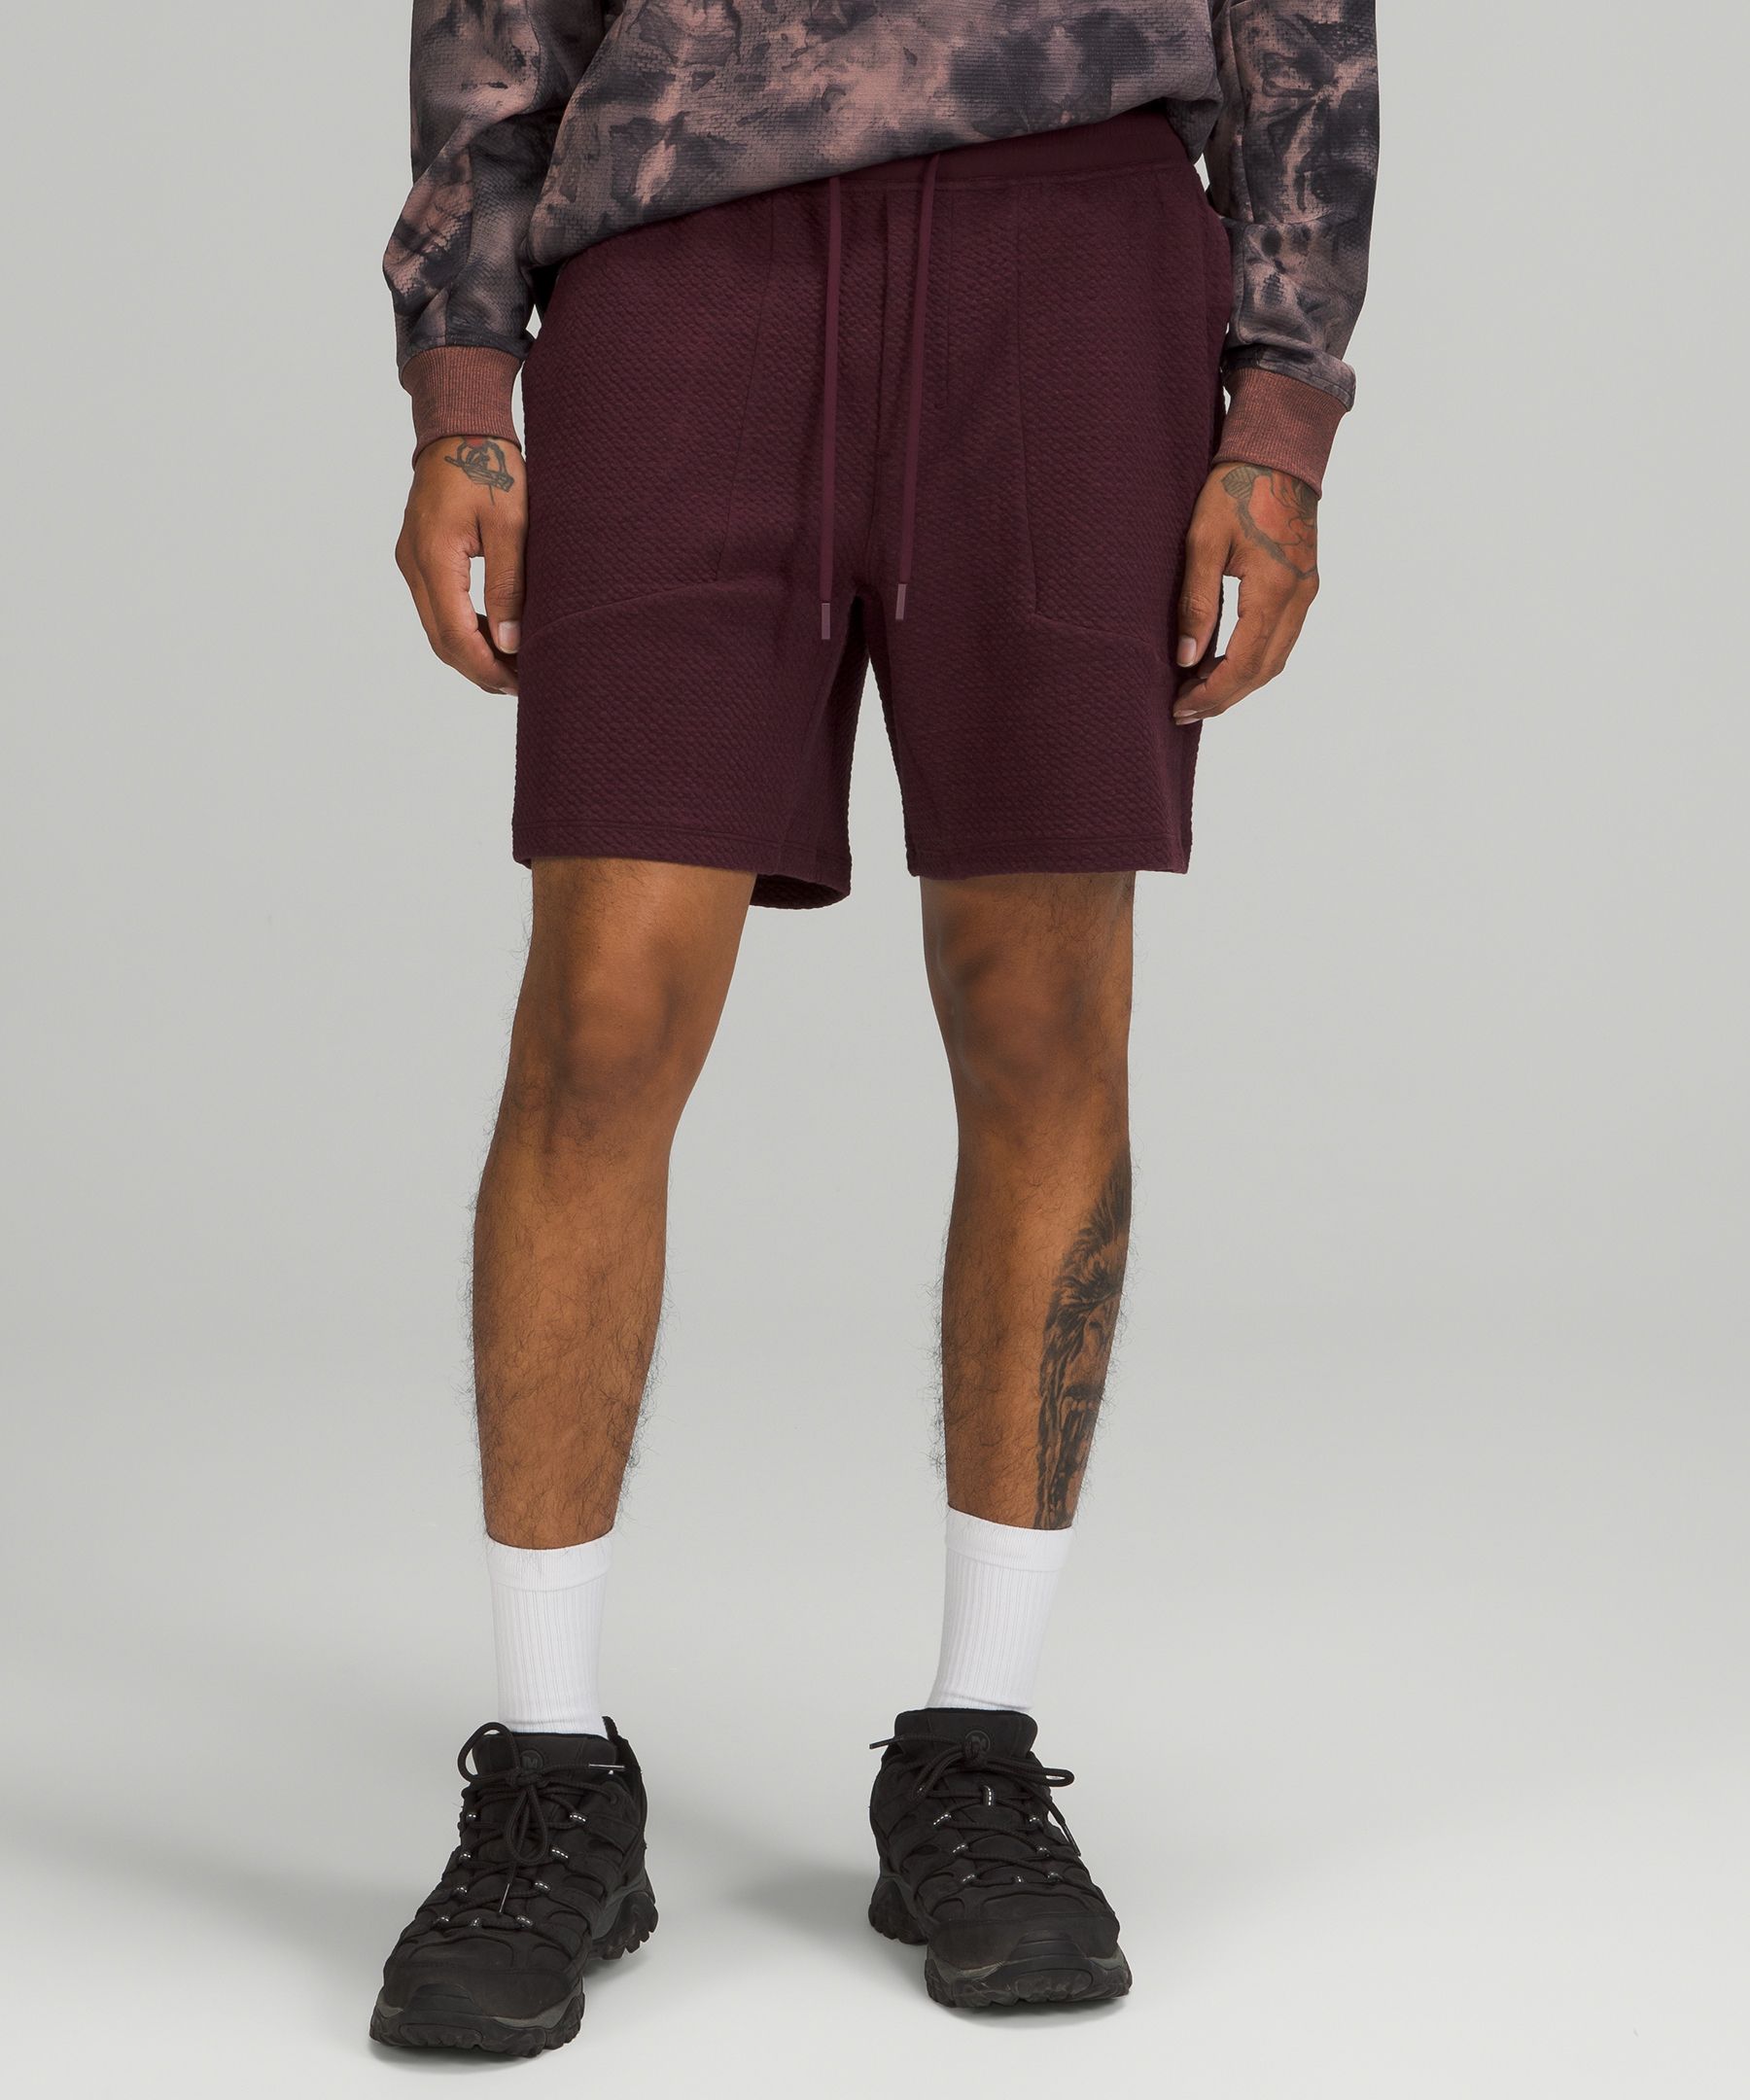 Lululemon At Ease Shorts 7" In Heathered Cassis/black